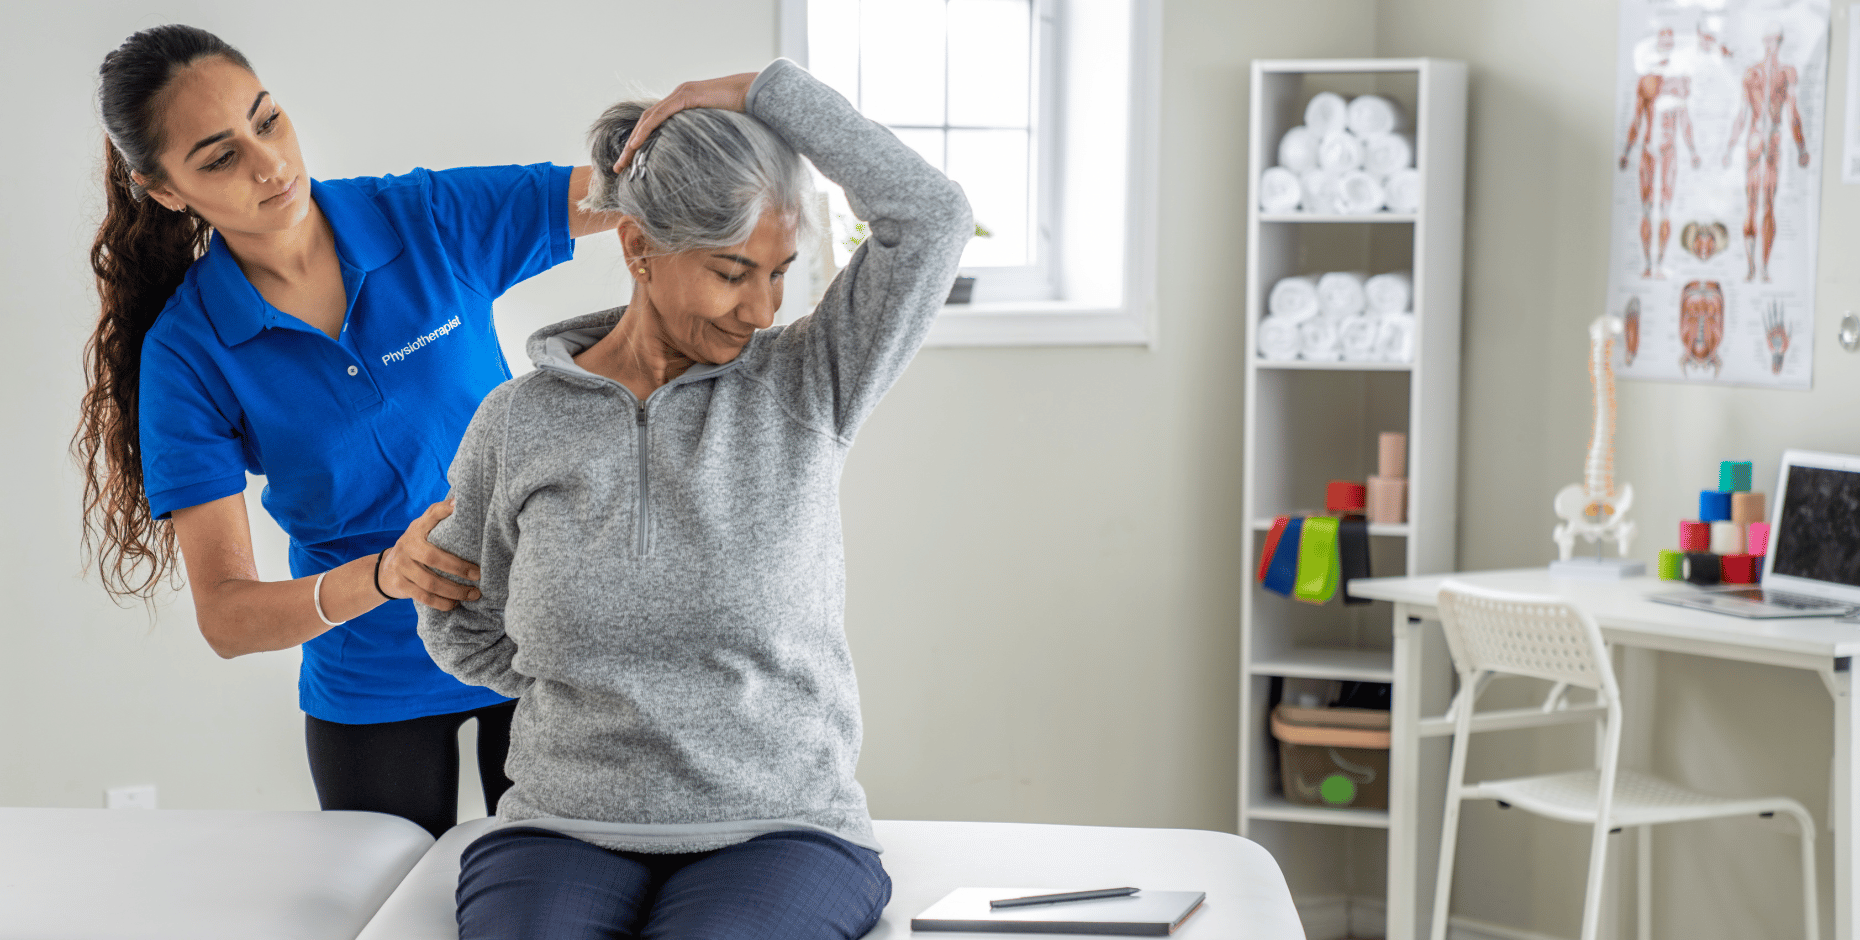 Physiotherapist in a clinic treats an older patient by performing stretches